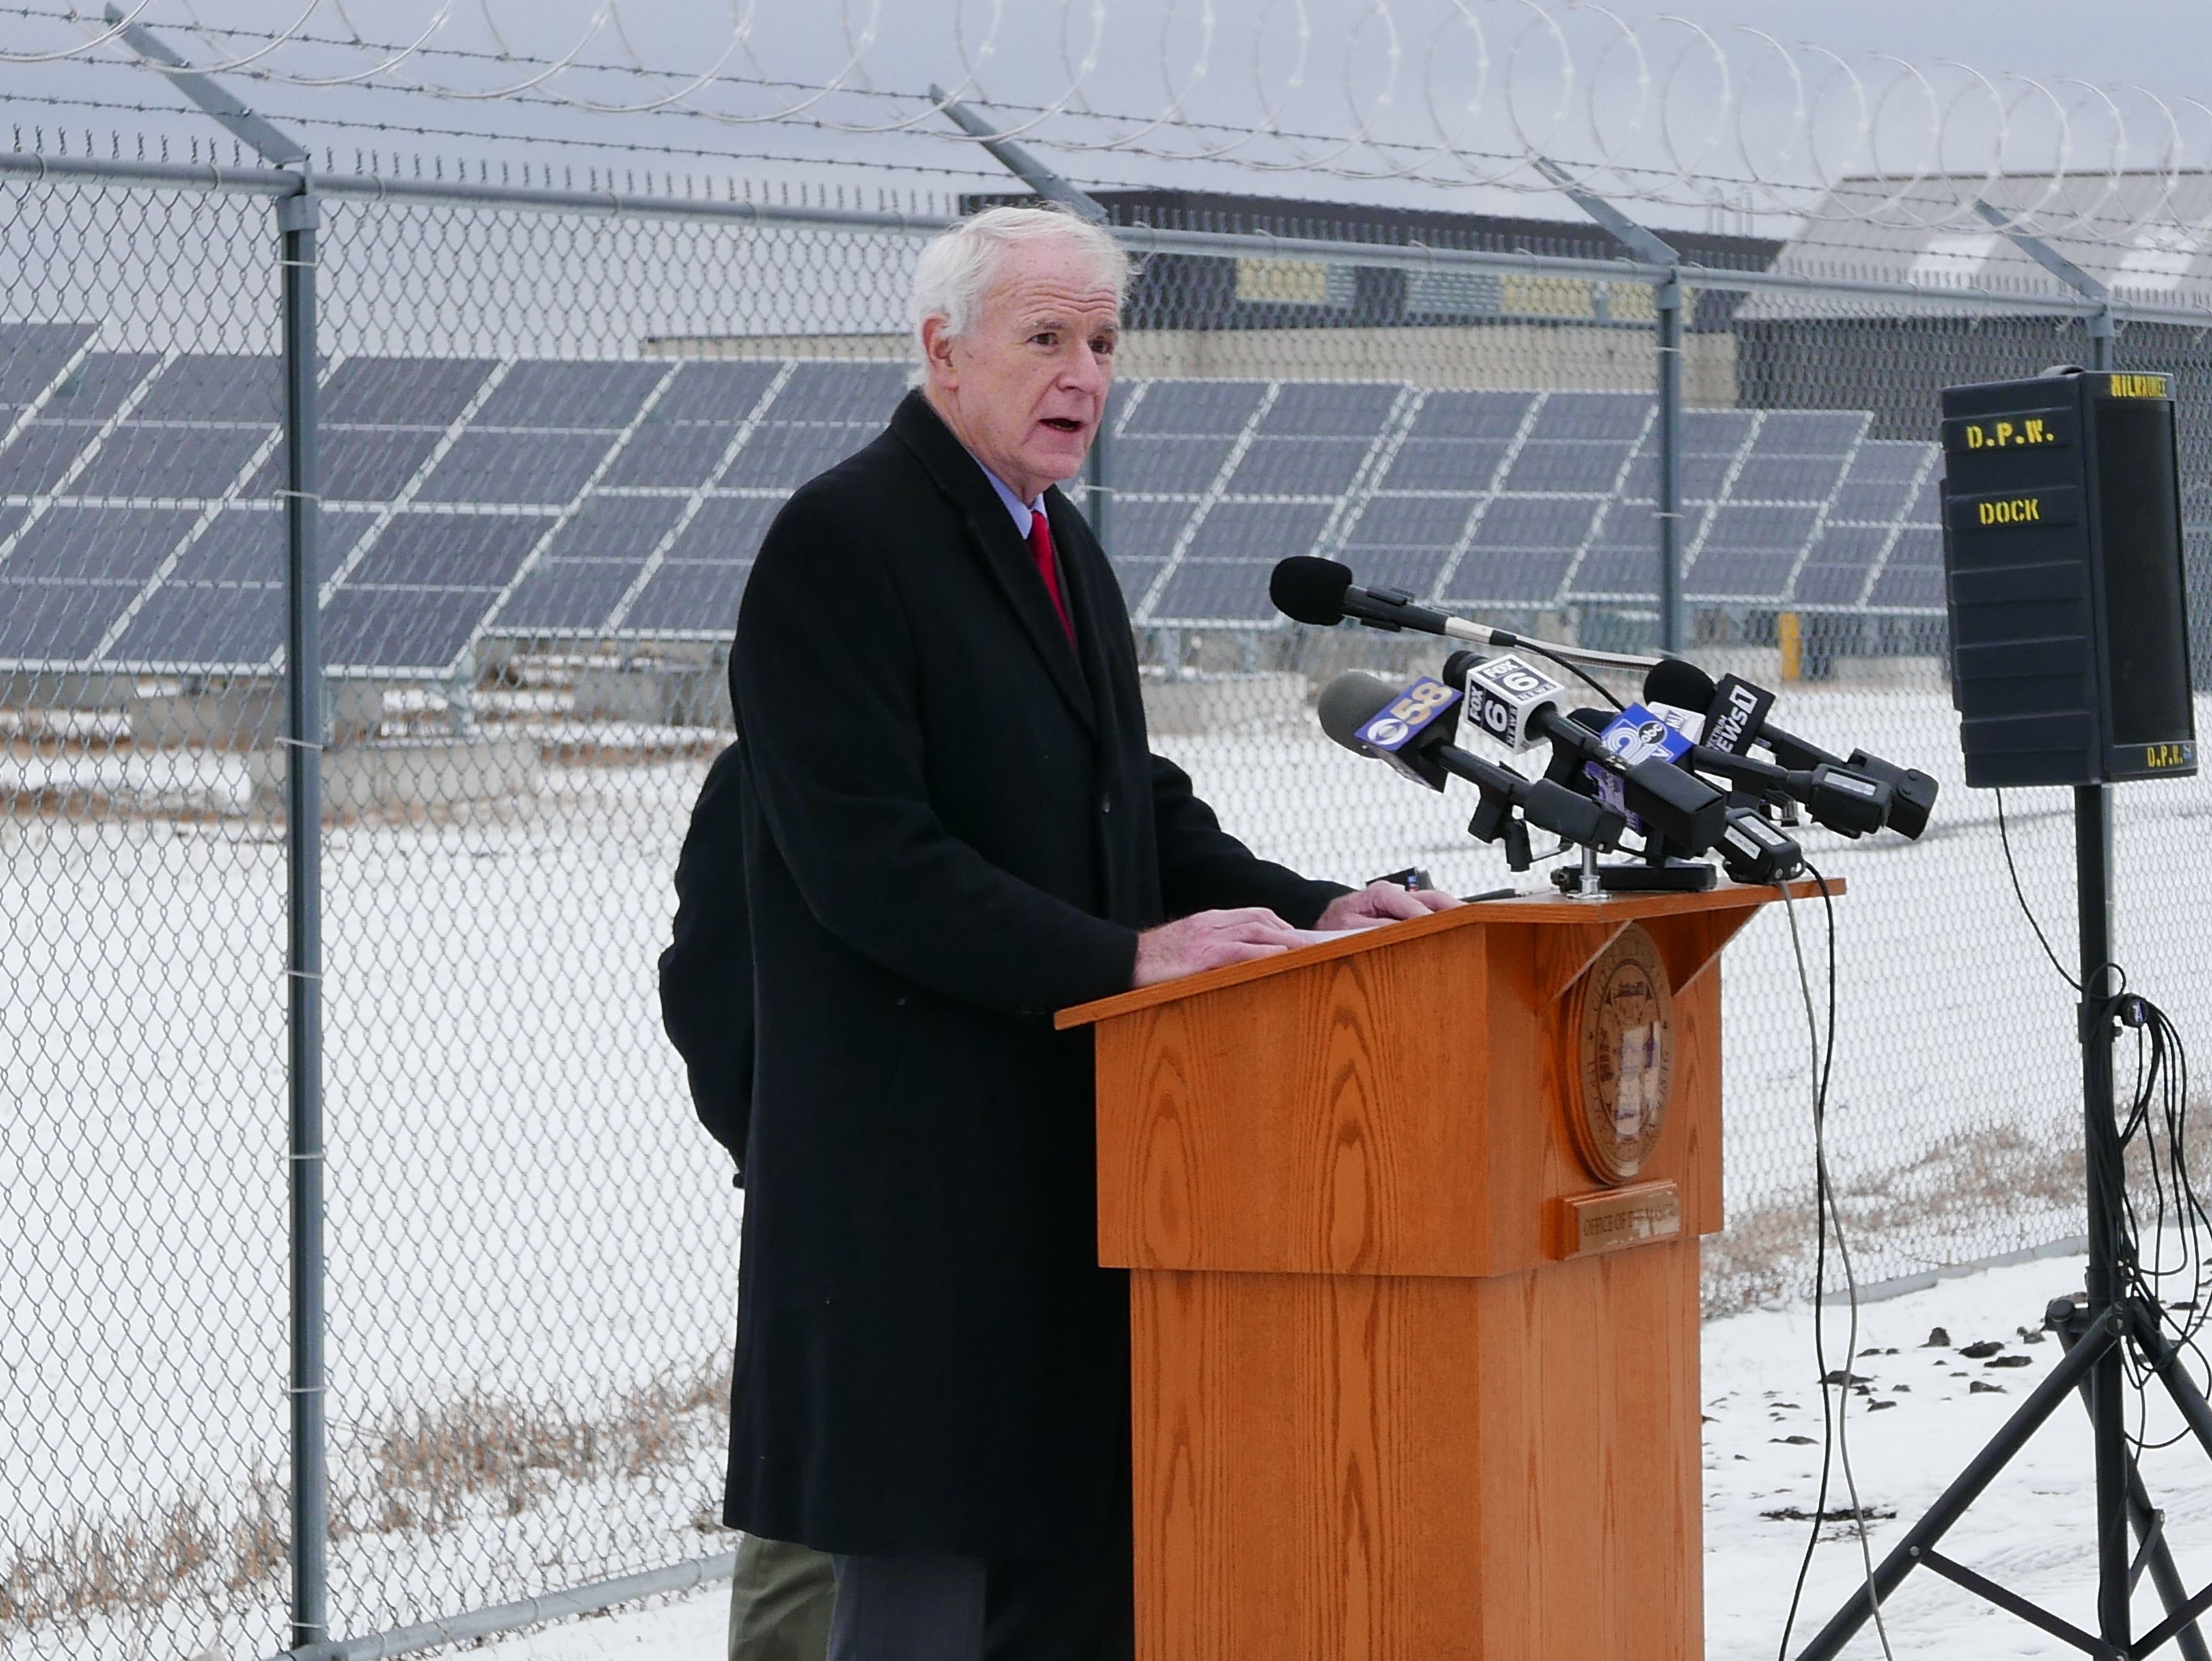 Mayor Tom Barrett speaks at the opening of a new solar installation at 1600 E. College Ave. Photo by Graham Kilmer.